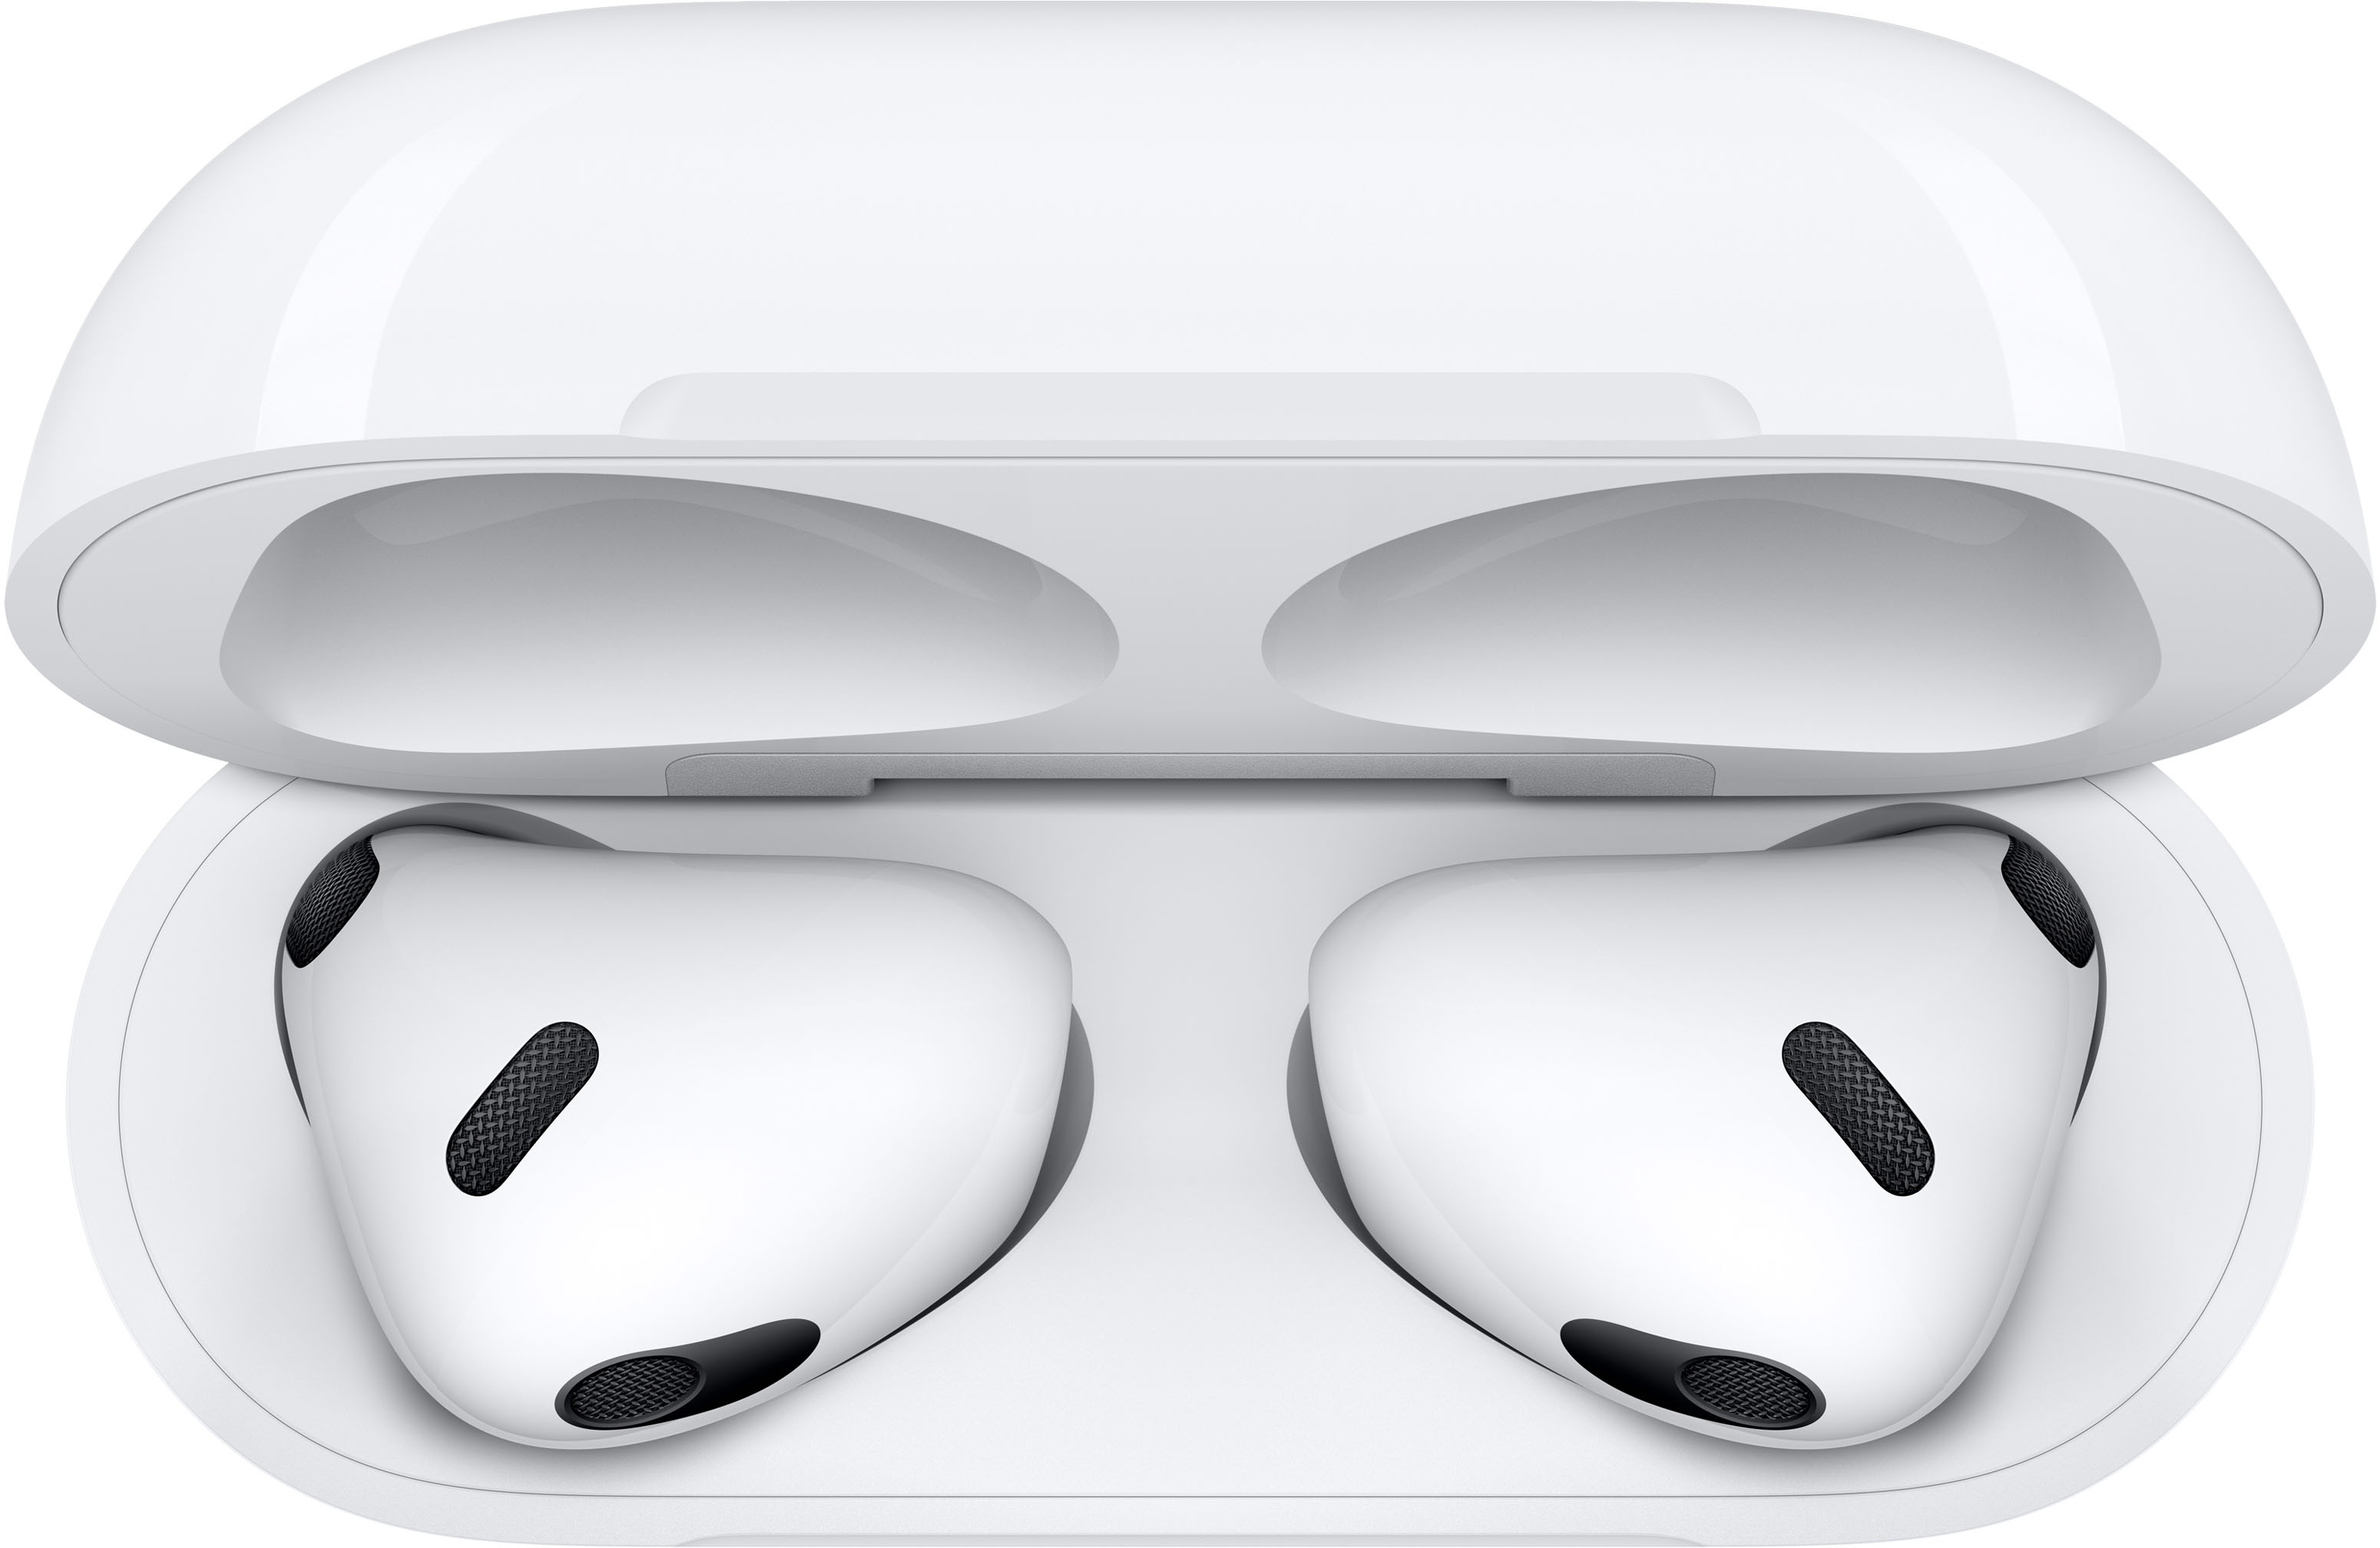 Apple Airpods (3rd Generation) - White 